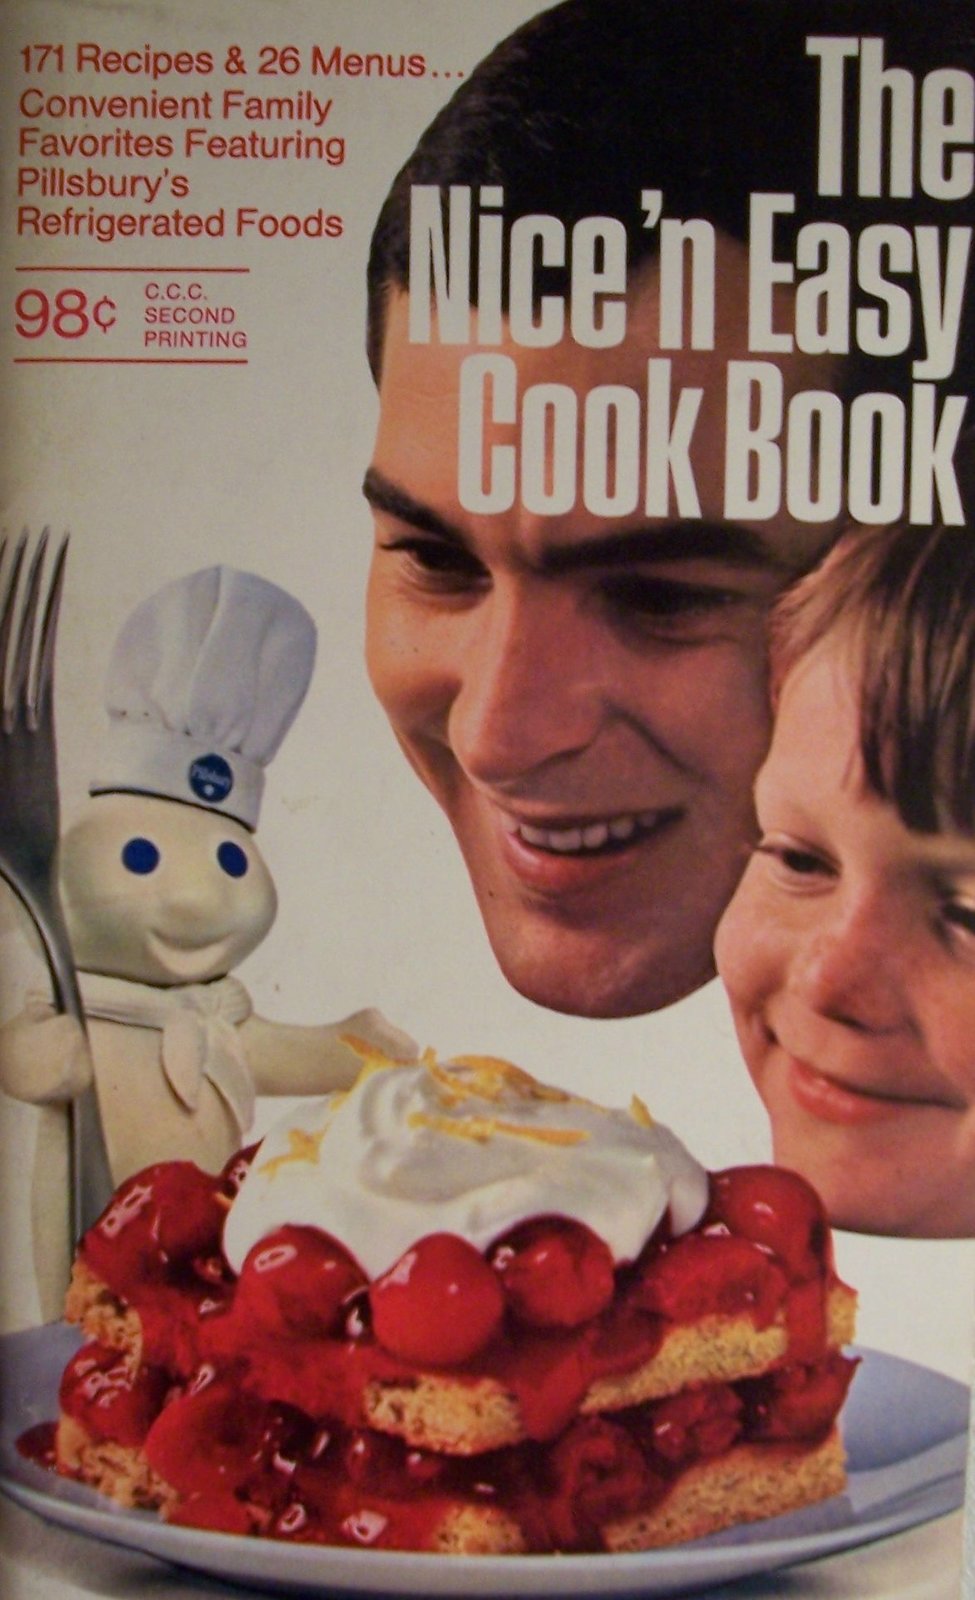 Primary image for Pillsbury The Nice 'n Easy Cook Book [ second printing ] 171 recipes & 26 menus.